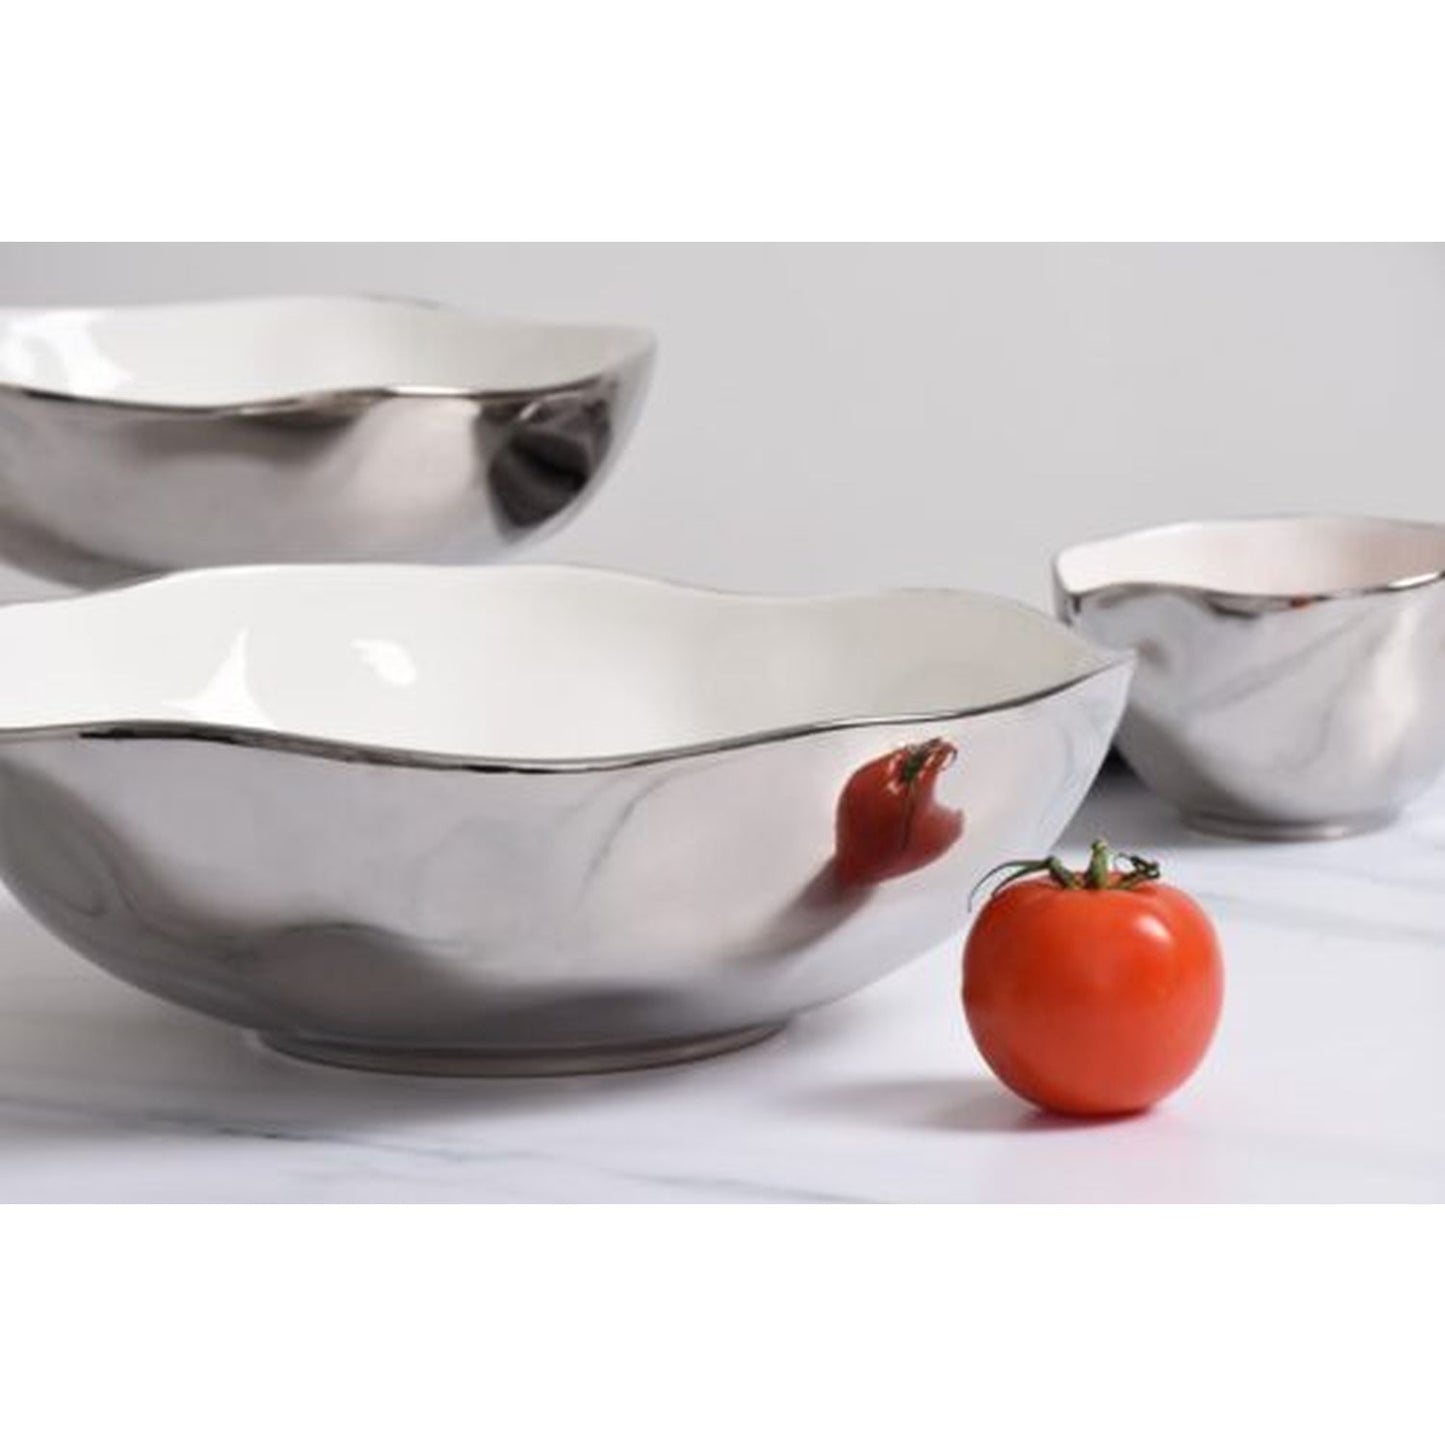 Pampa Bay Thin & Simple Wide Bowl